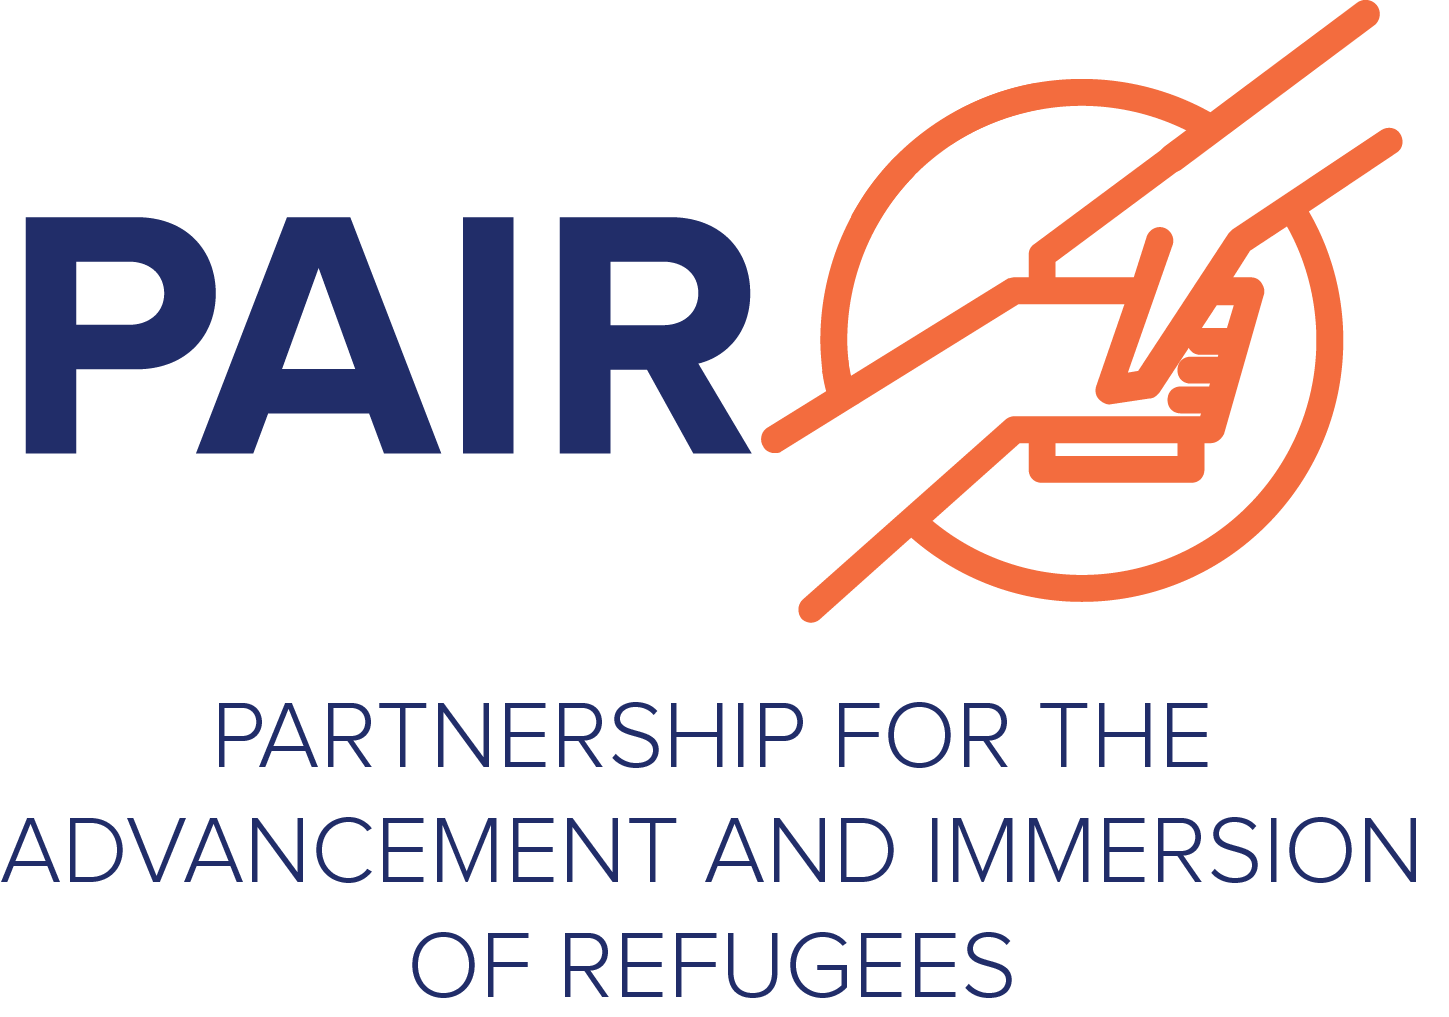 Partnership for the Advancement and Immersion of Refugees - PAIR 